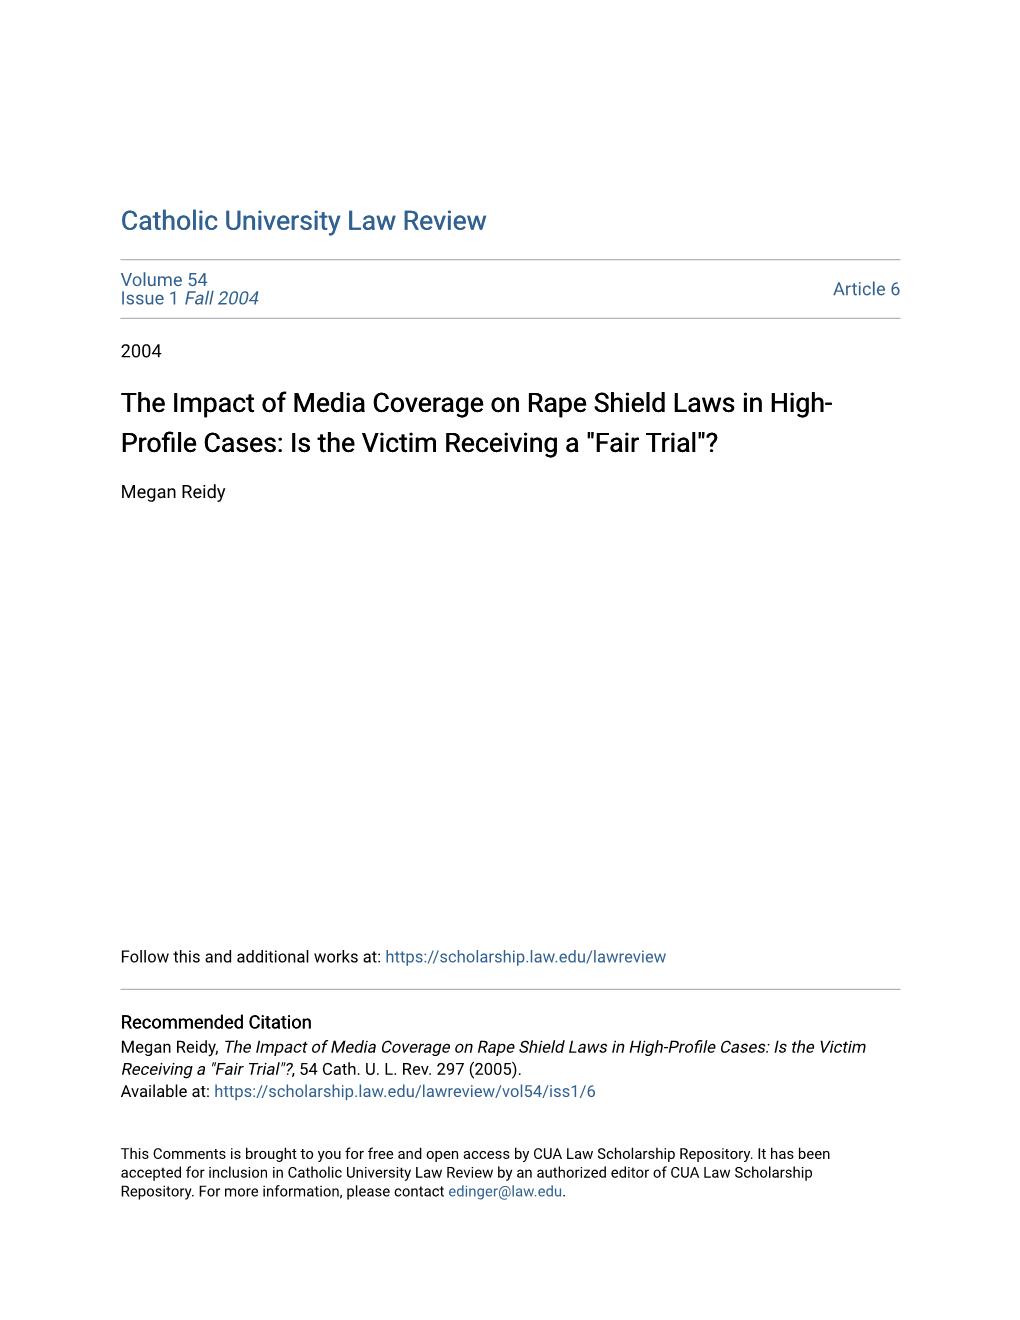 The Impact of Media Coverage on Rape Shield Laws in High-Profile Cases: Is the Victim Receiving a "Fair Trial"?, 54 Cath